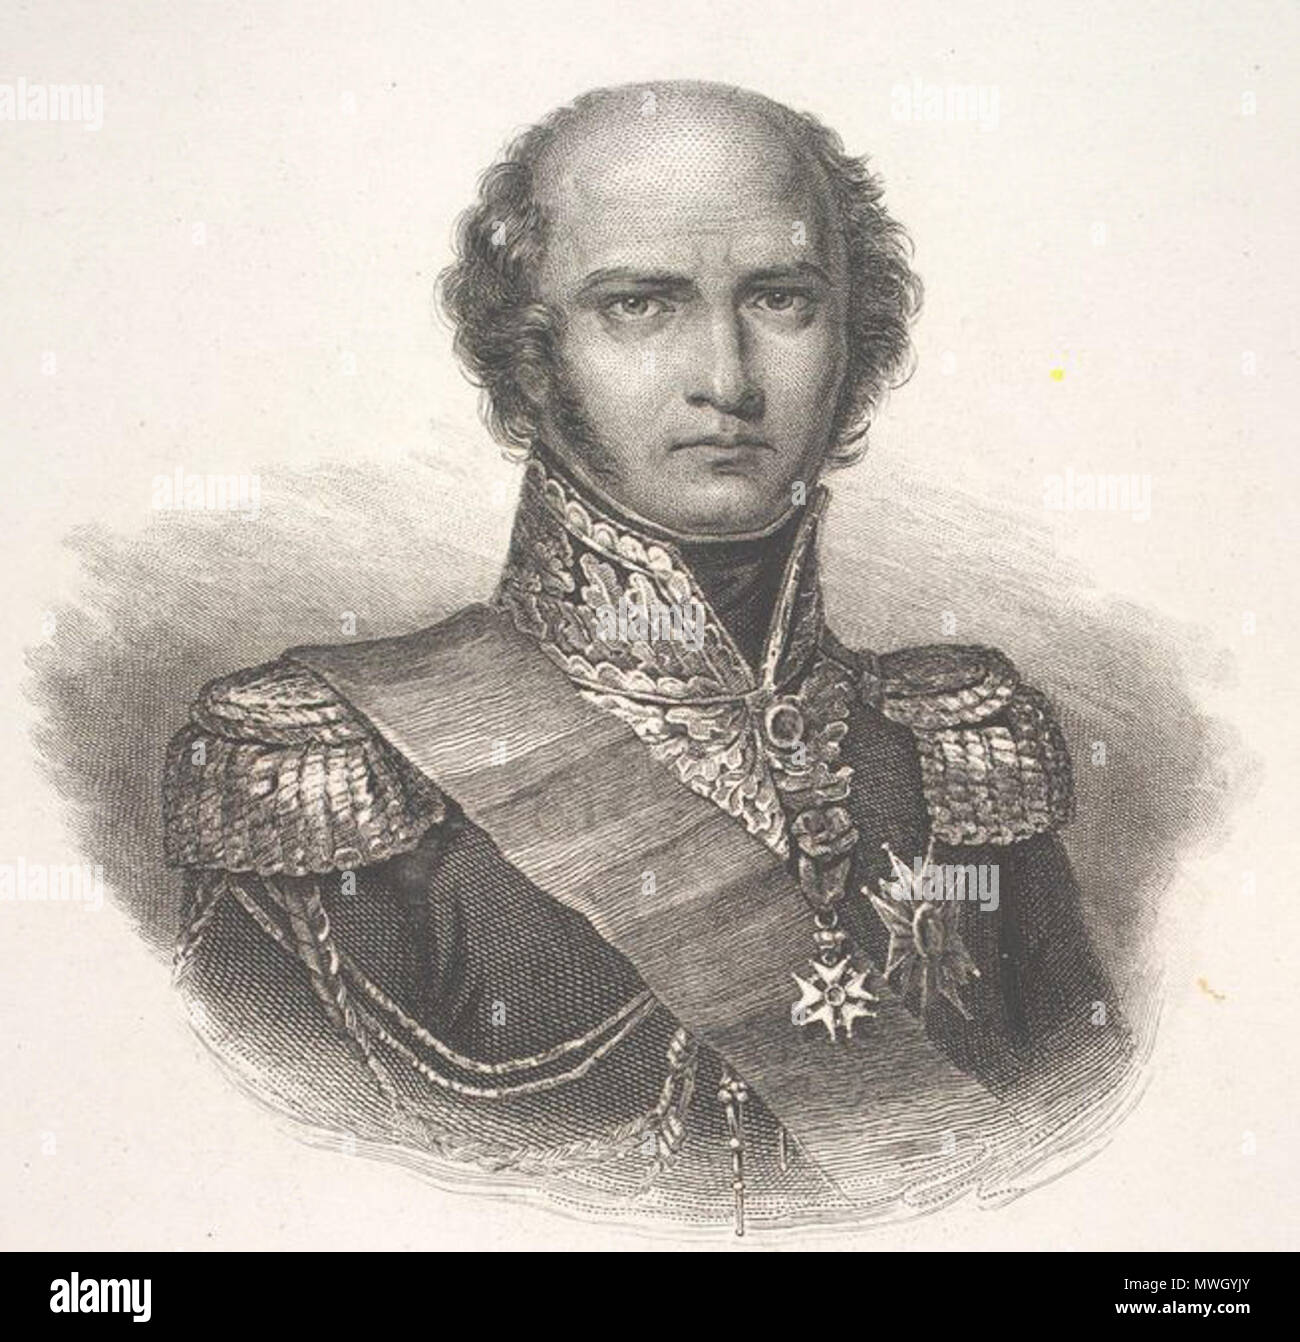 Louisnicolas Davout Duke Of Auerstaedt Marshal Of The Empire High